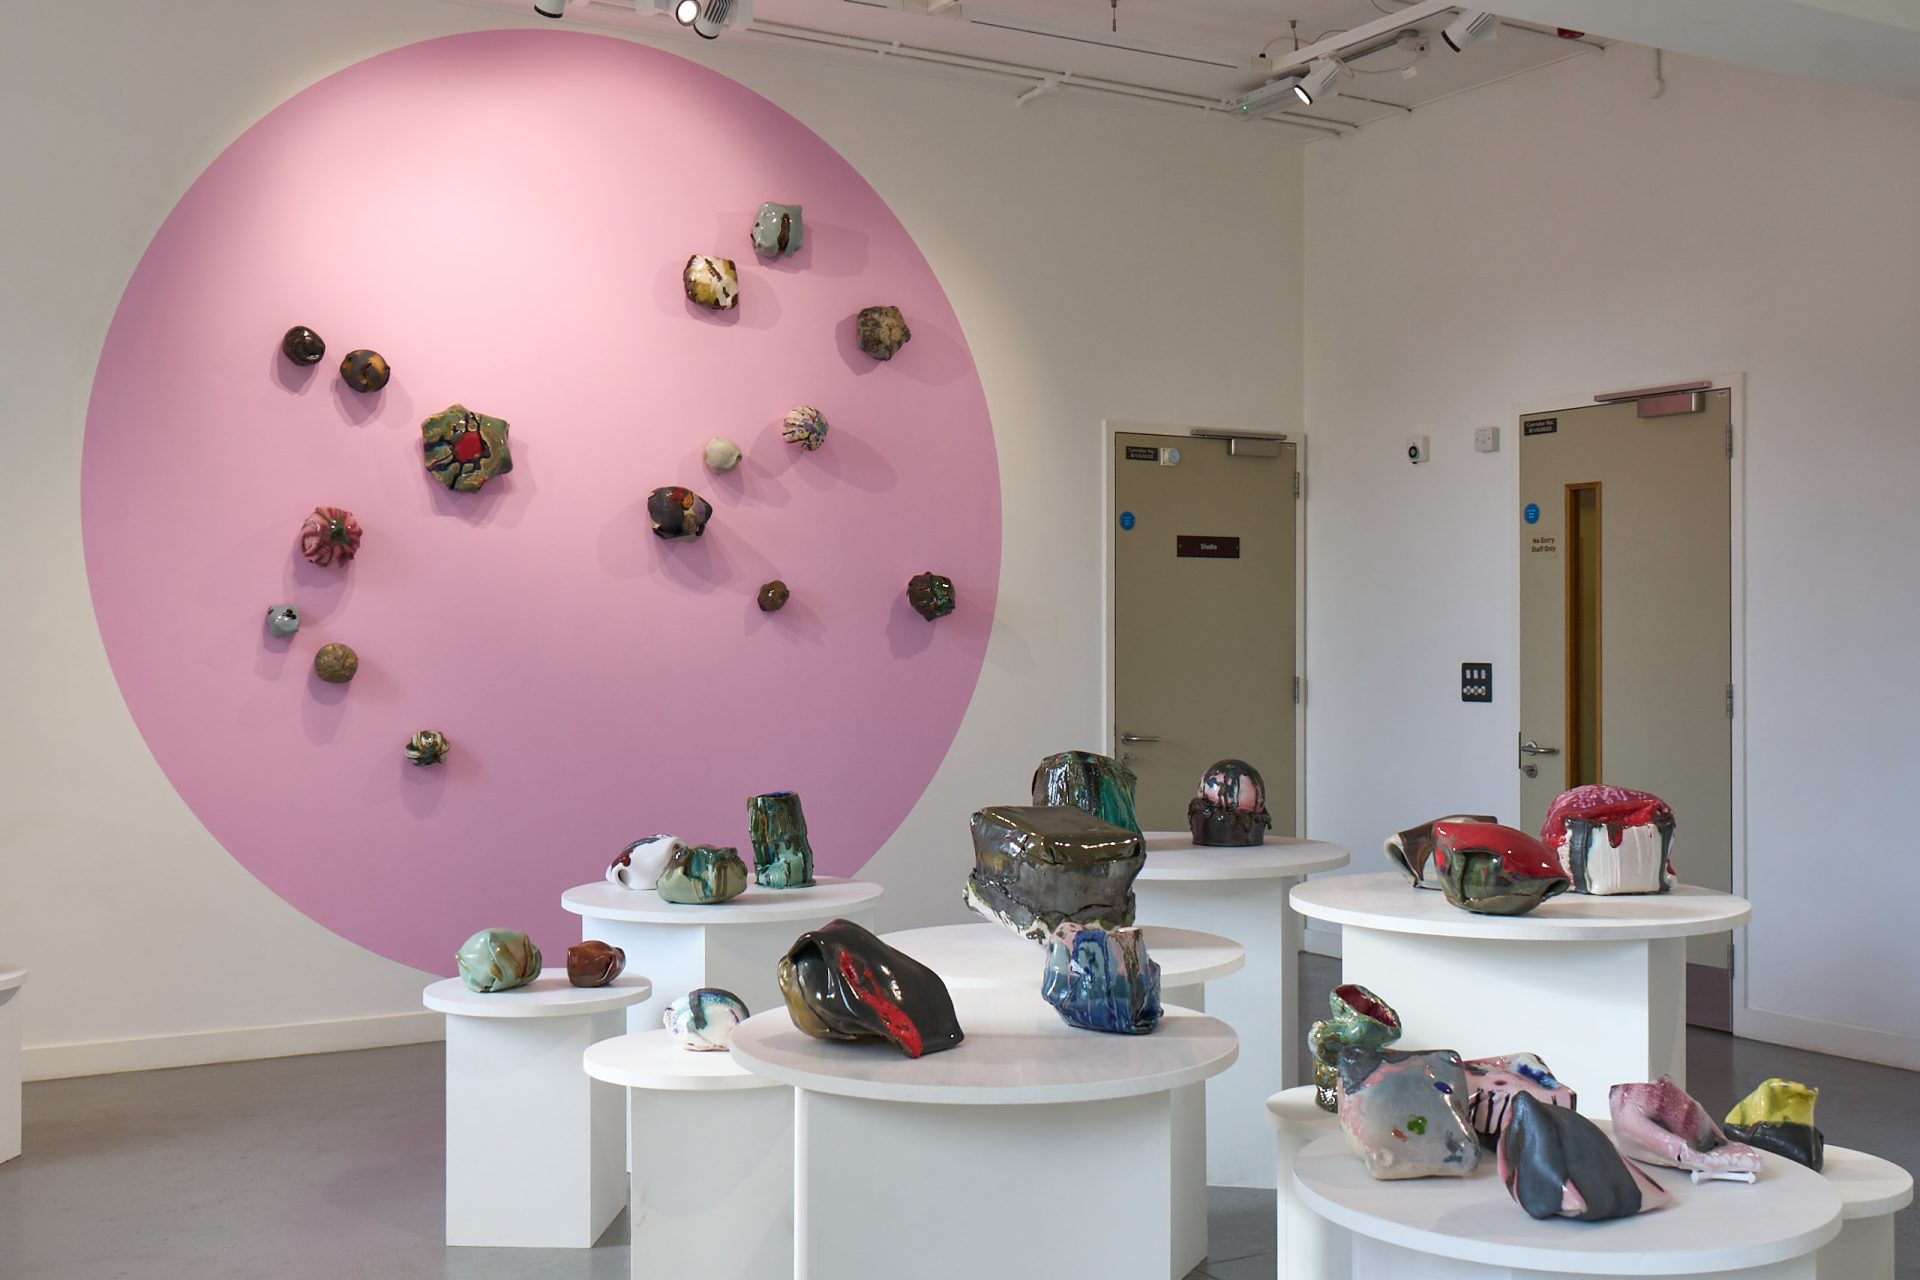 A gallery space with large pink circle painted on the wall. On this wall and plinths below are lots of brightly coloured and irregularly shaped ceramic sculptures.